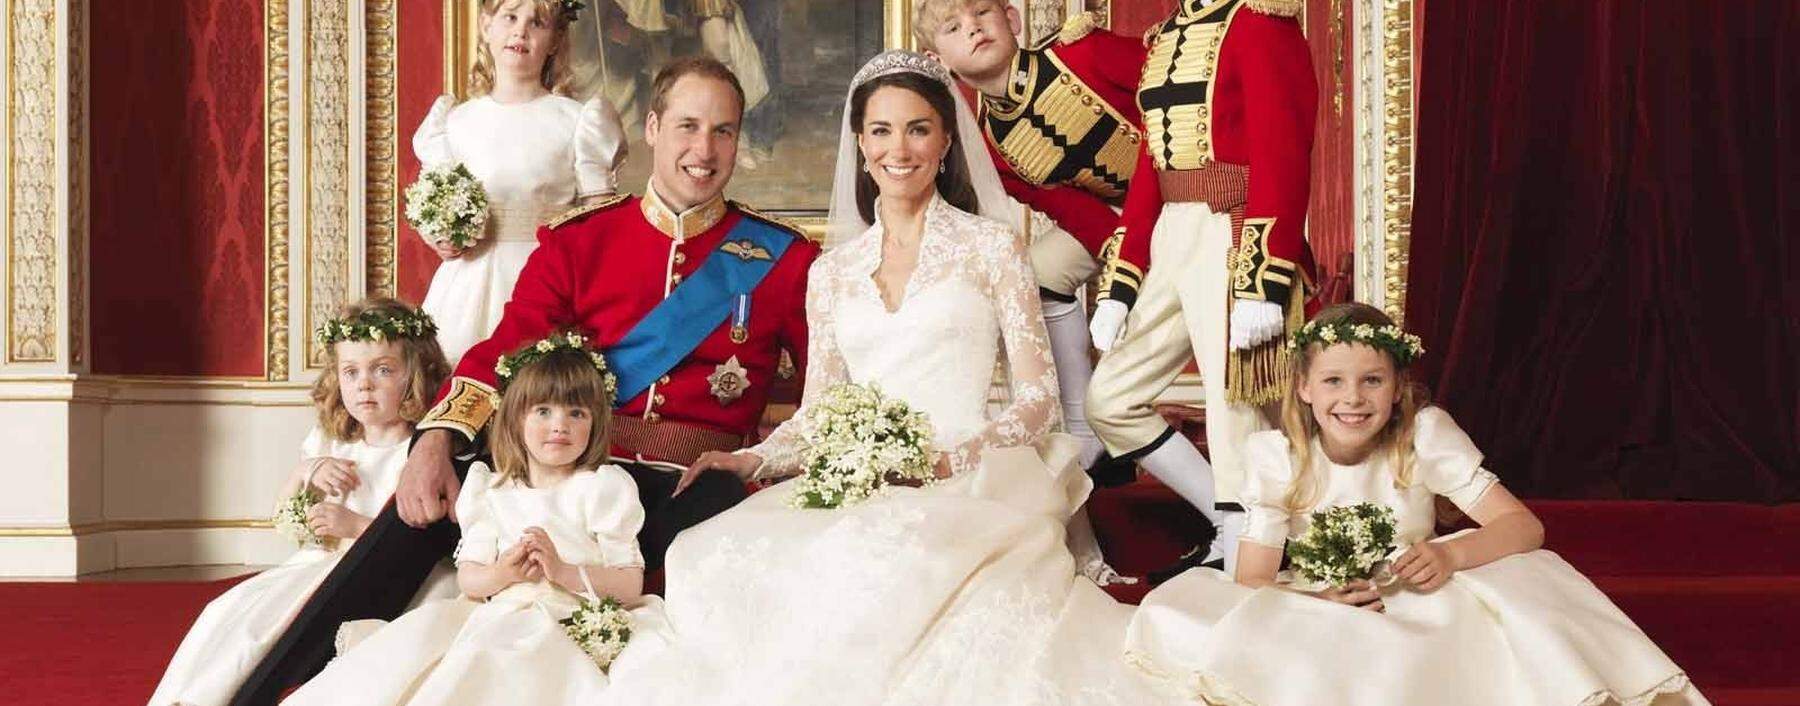 File photograph shows Britain´s Prince William and his bride Catherine, Duchess of Cambridge, posing for an official photograph on the day of their wedding, in central London